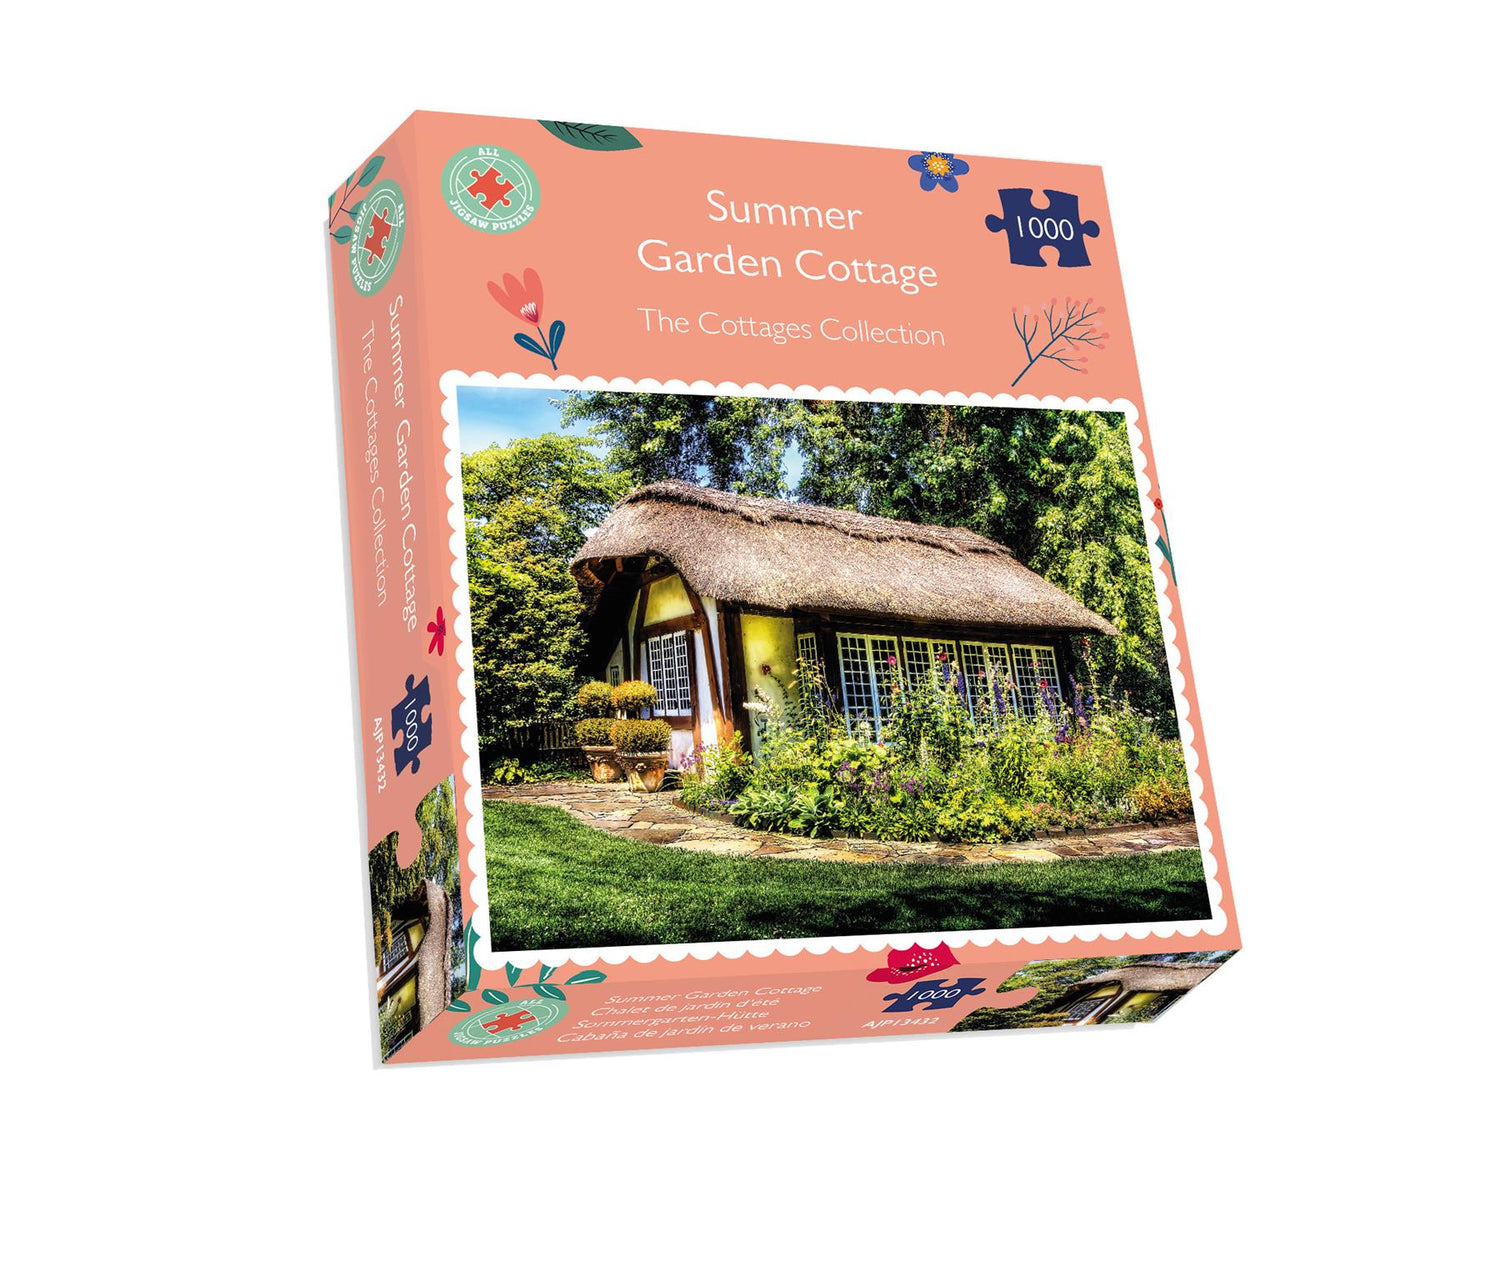 Flowers and Gardens Jigsaw Puzzles